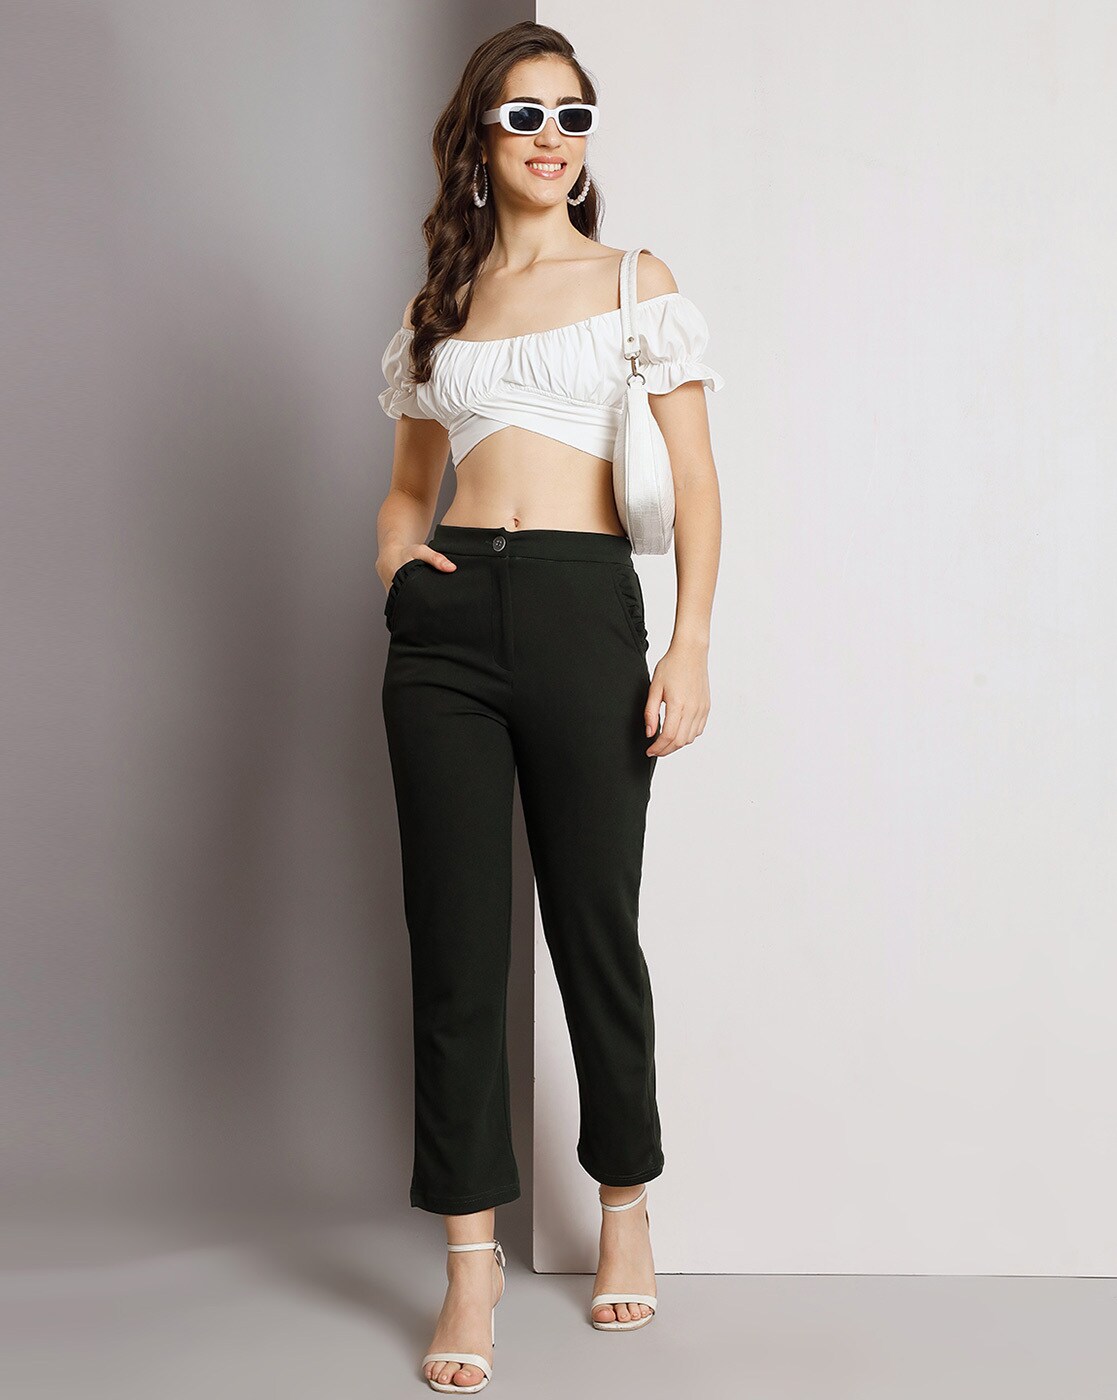 Buy Olive Trousers & Pants for Women by Q - RIOUS Online